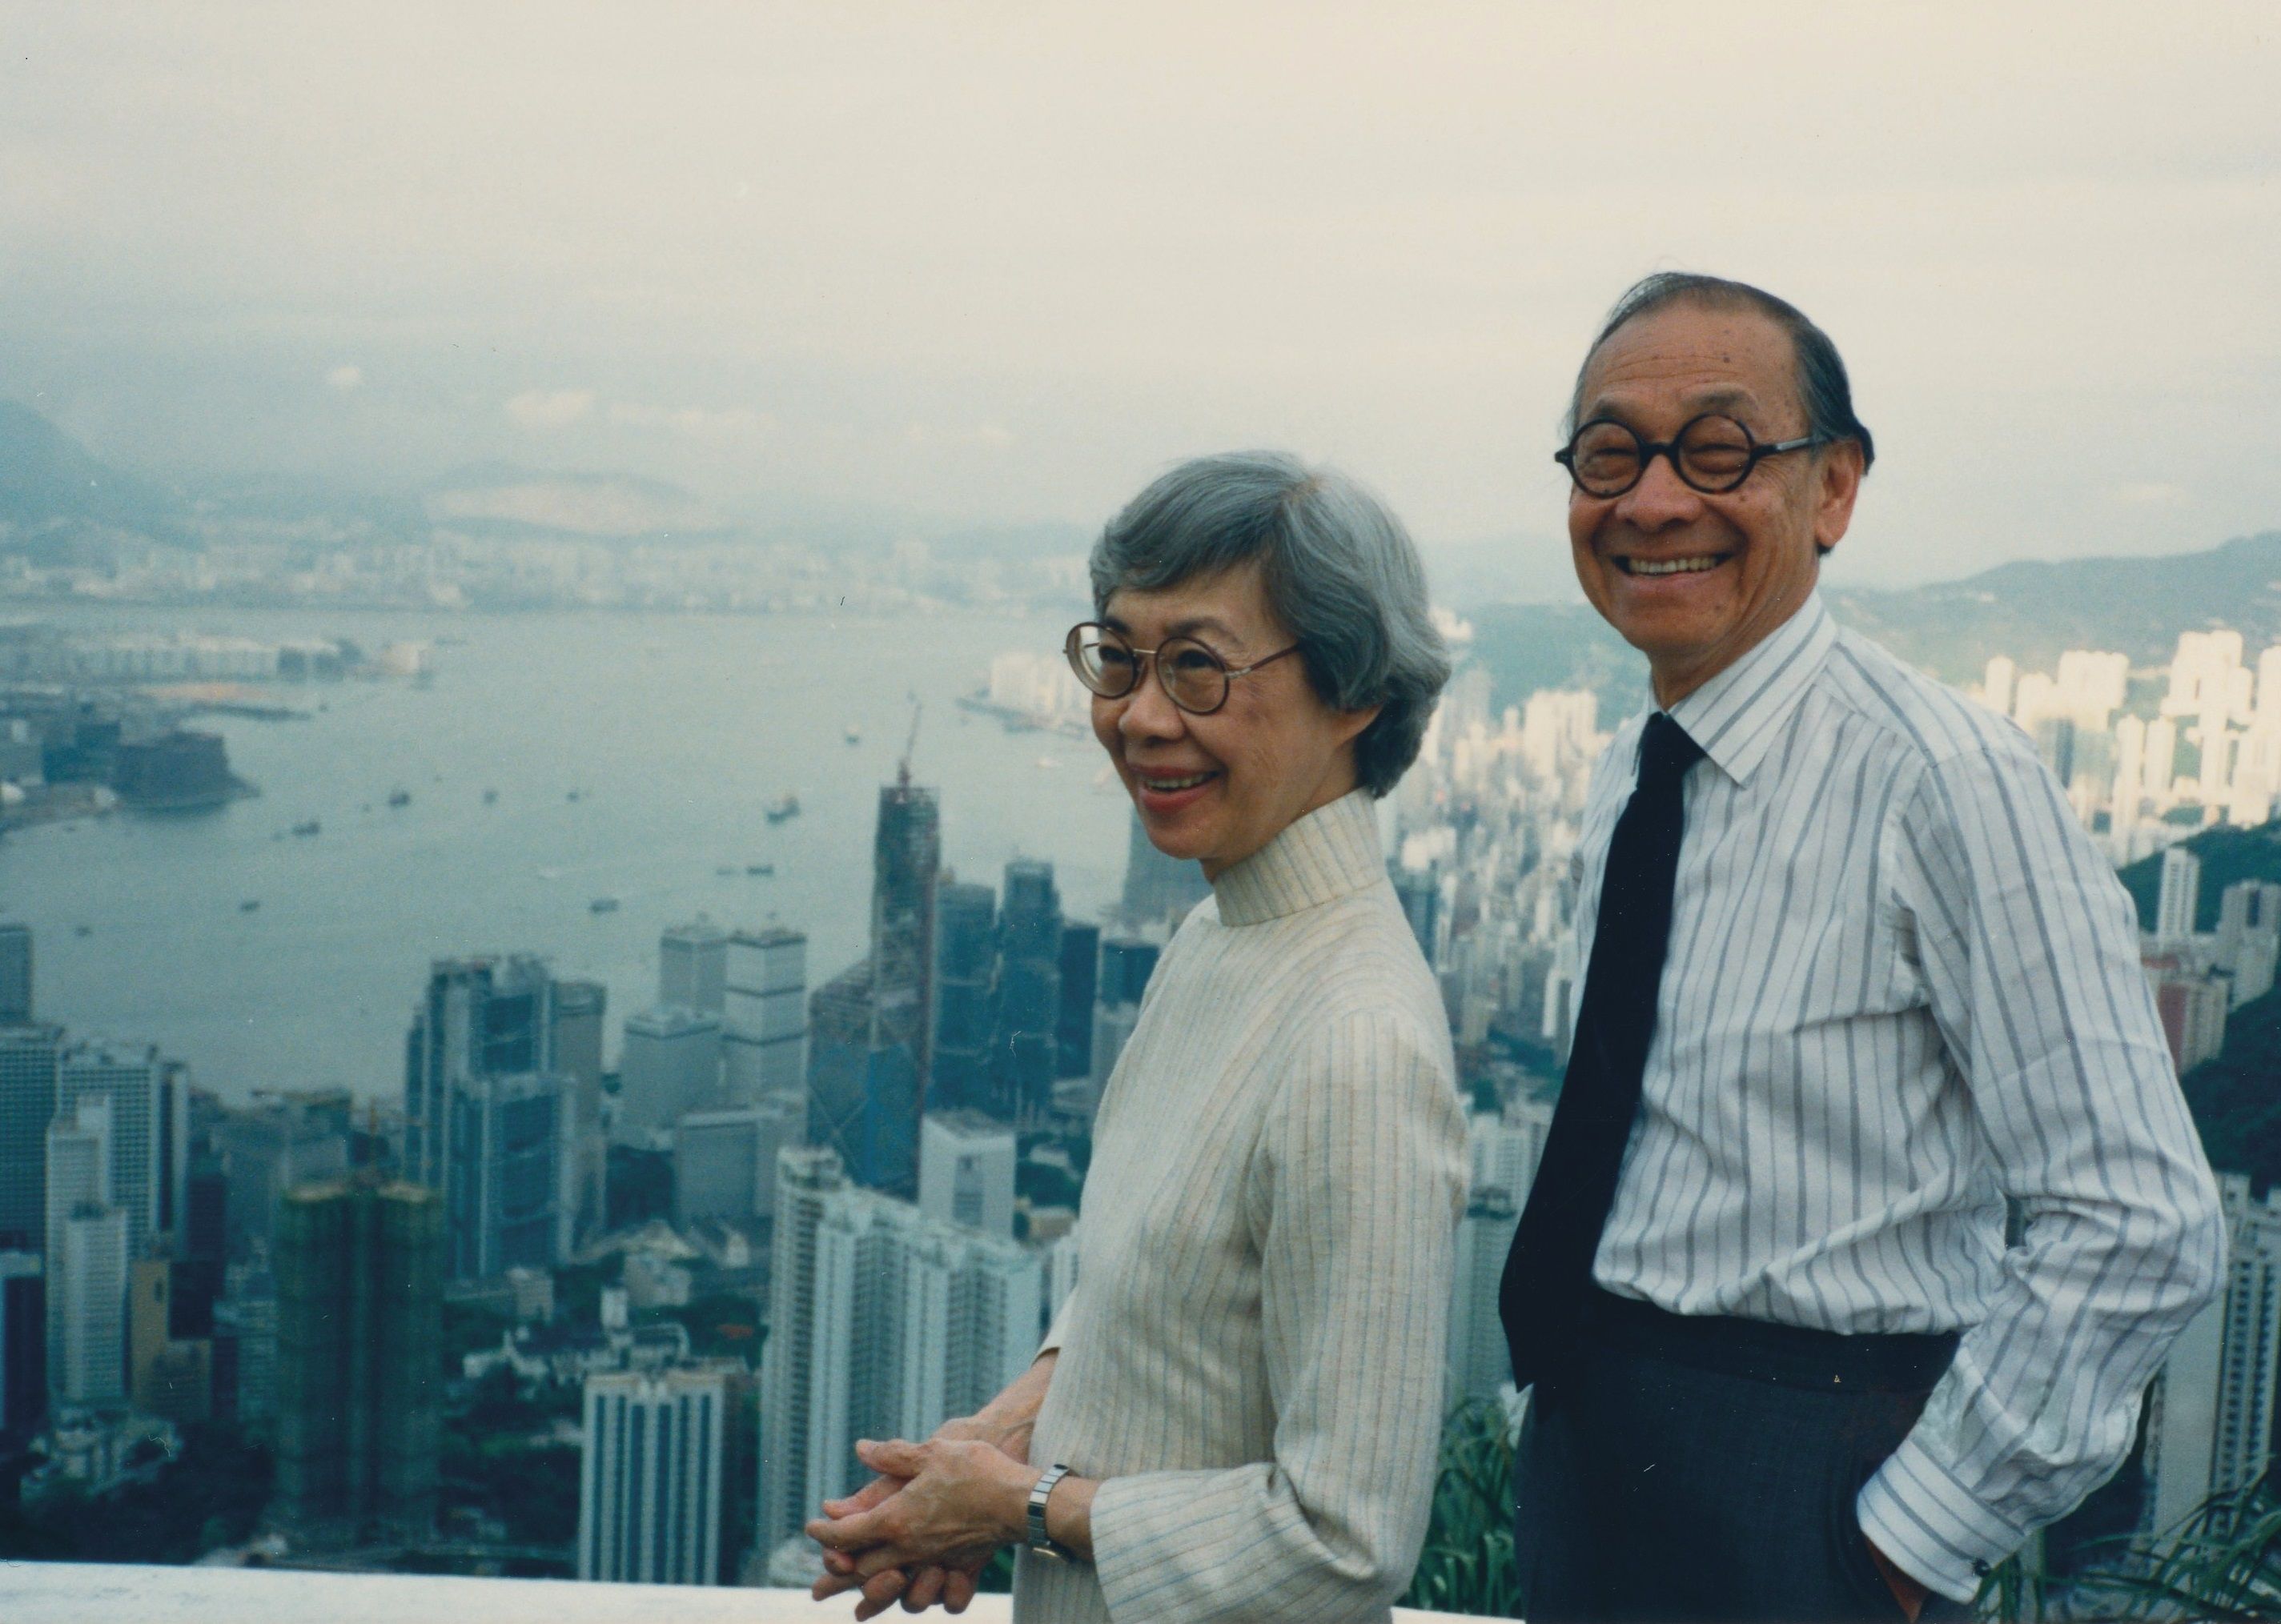 A photo of a man, I.M. Pei, and woman against a skyline